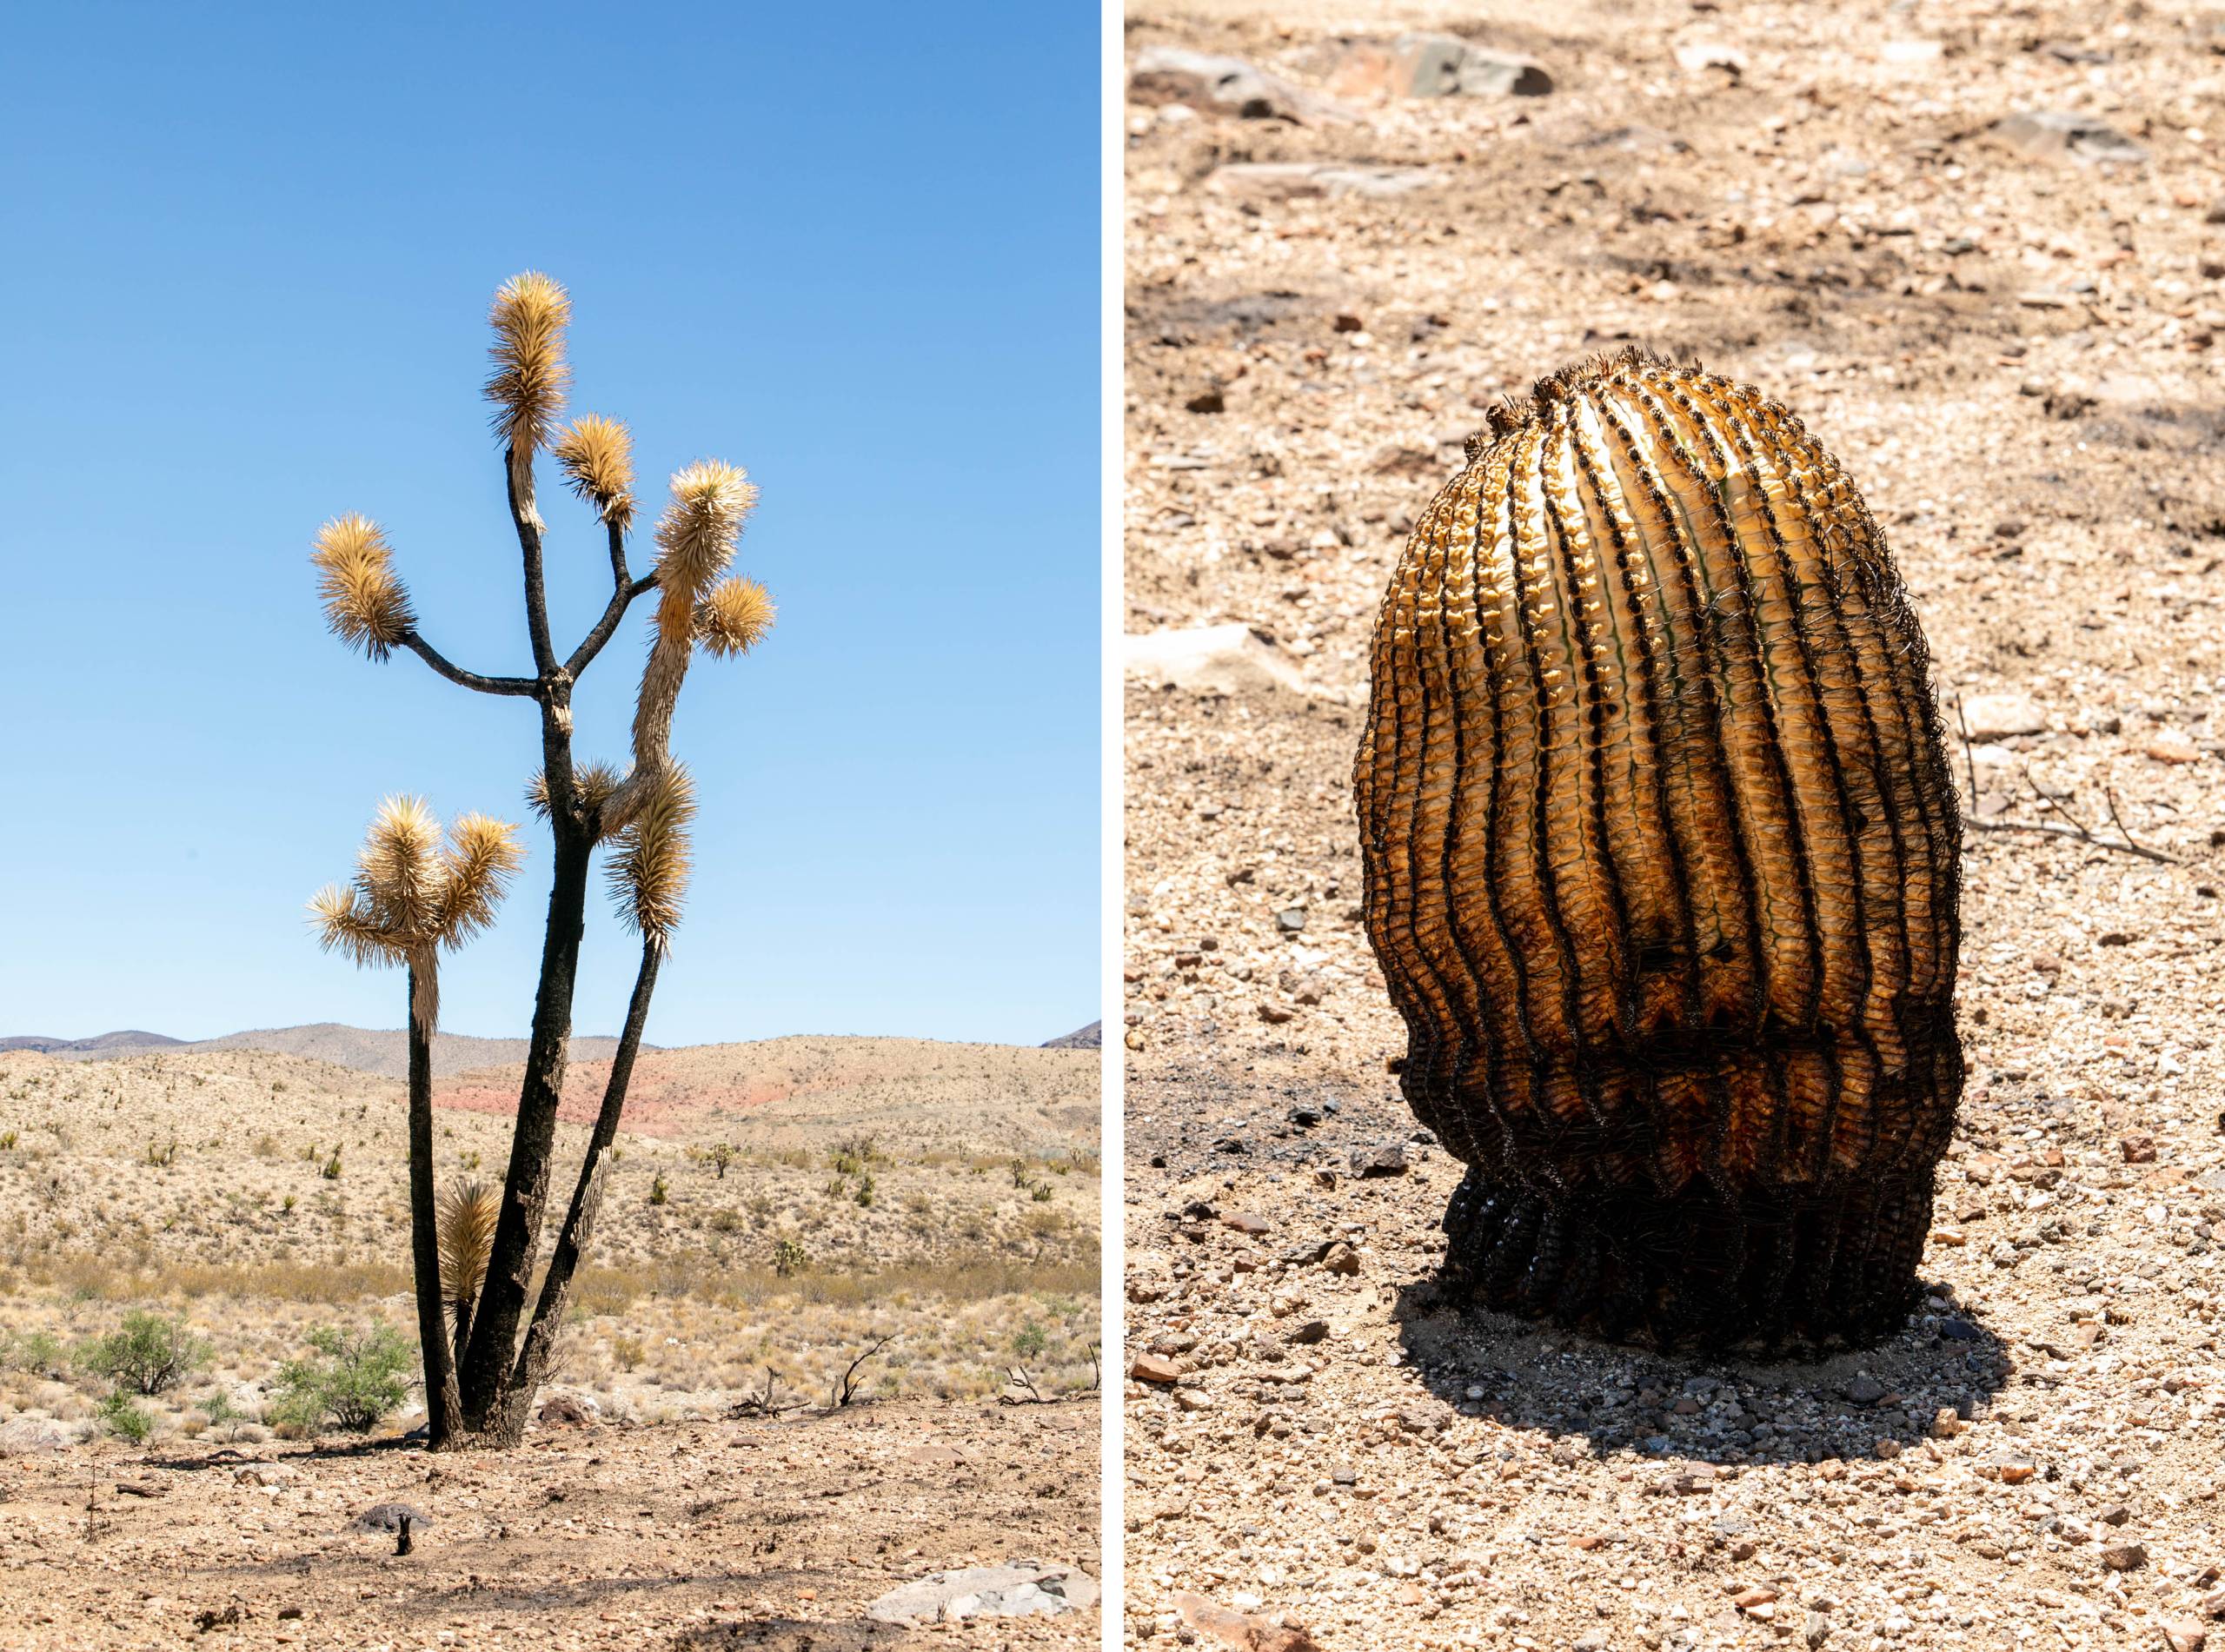 Two photos side-by-side,burnt desert plants in an arid landscape with blue skies behind and hills on the horizon in the left photo.